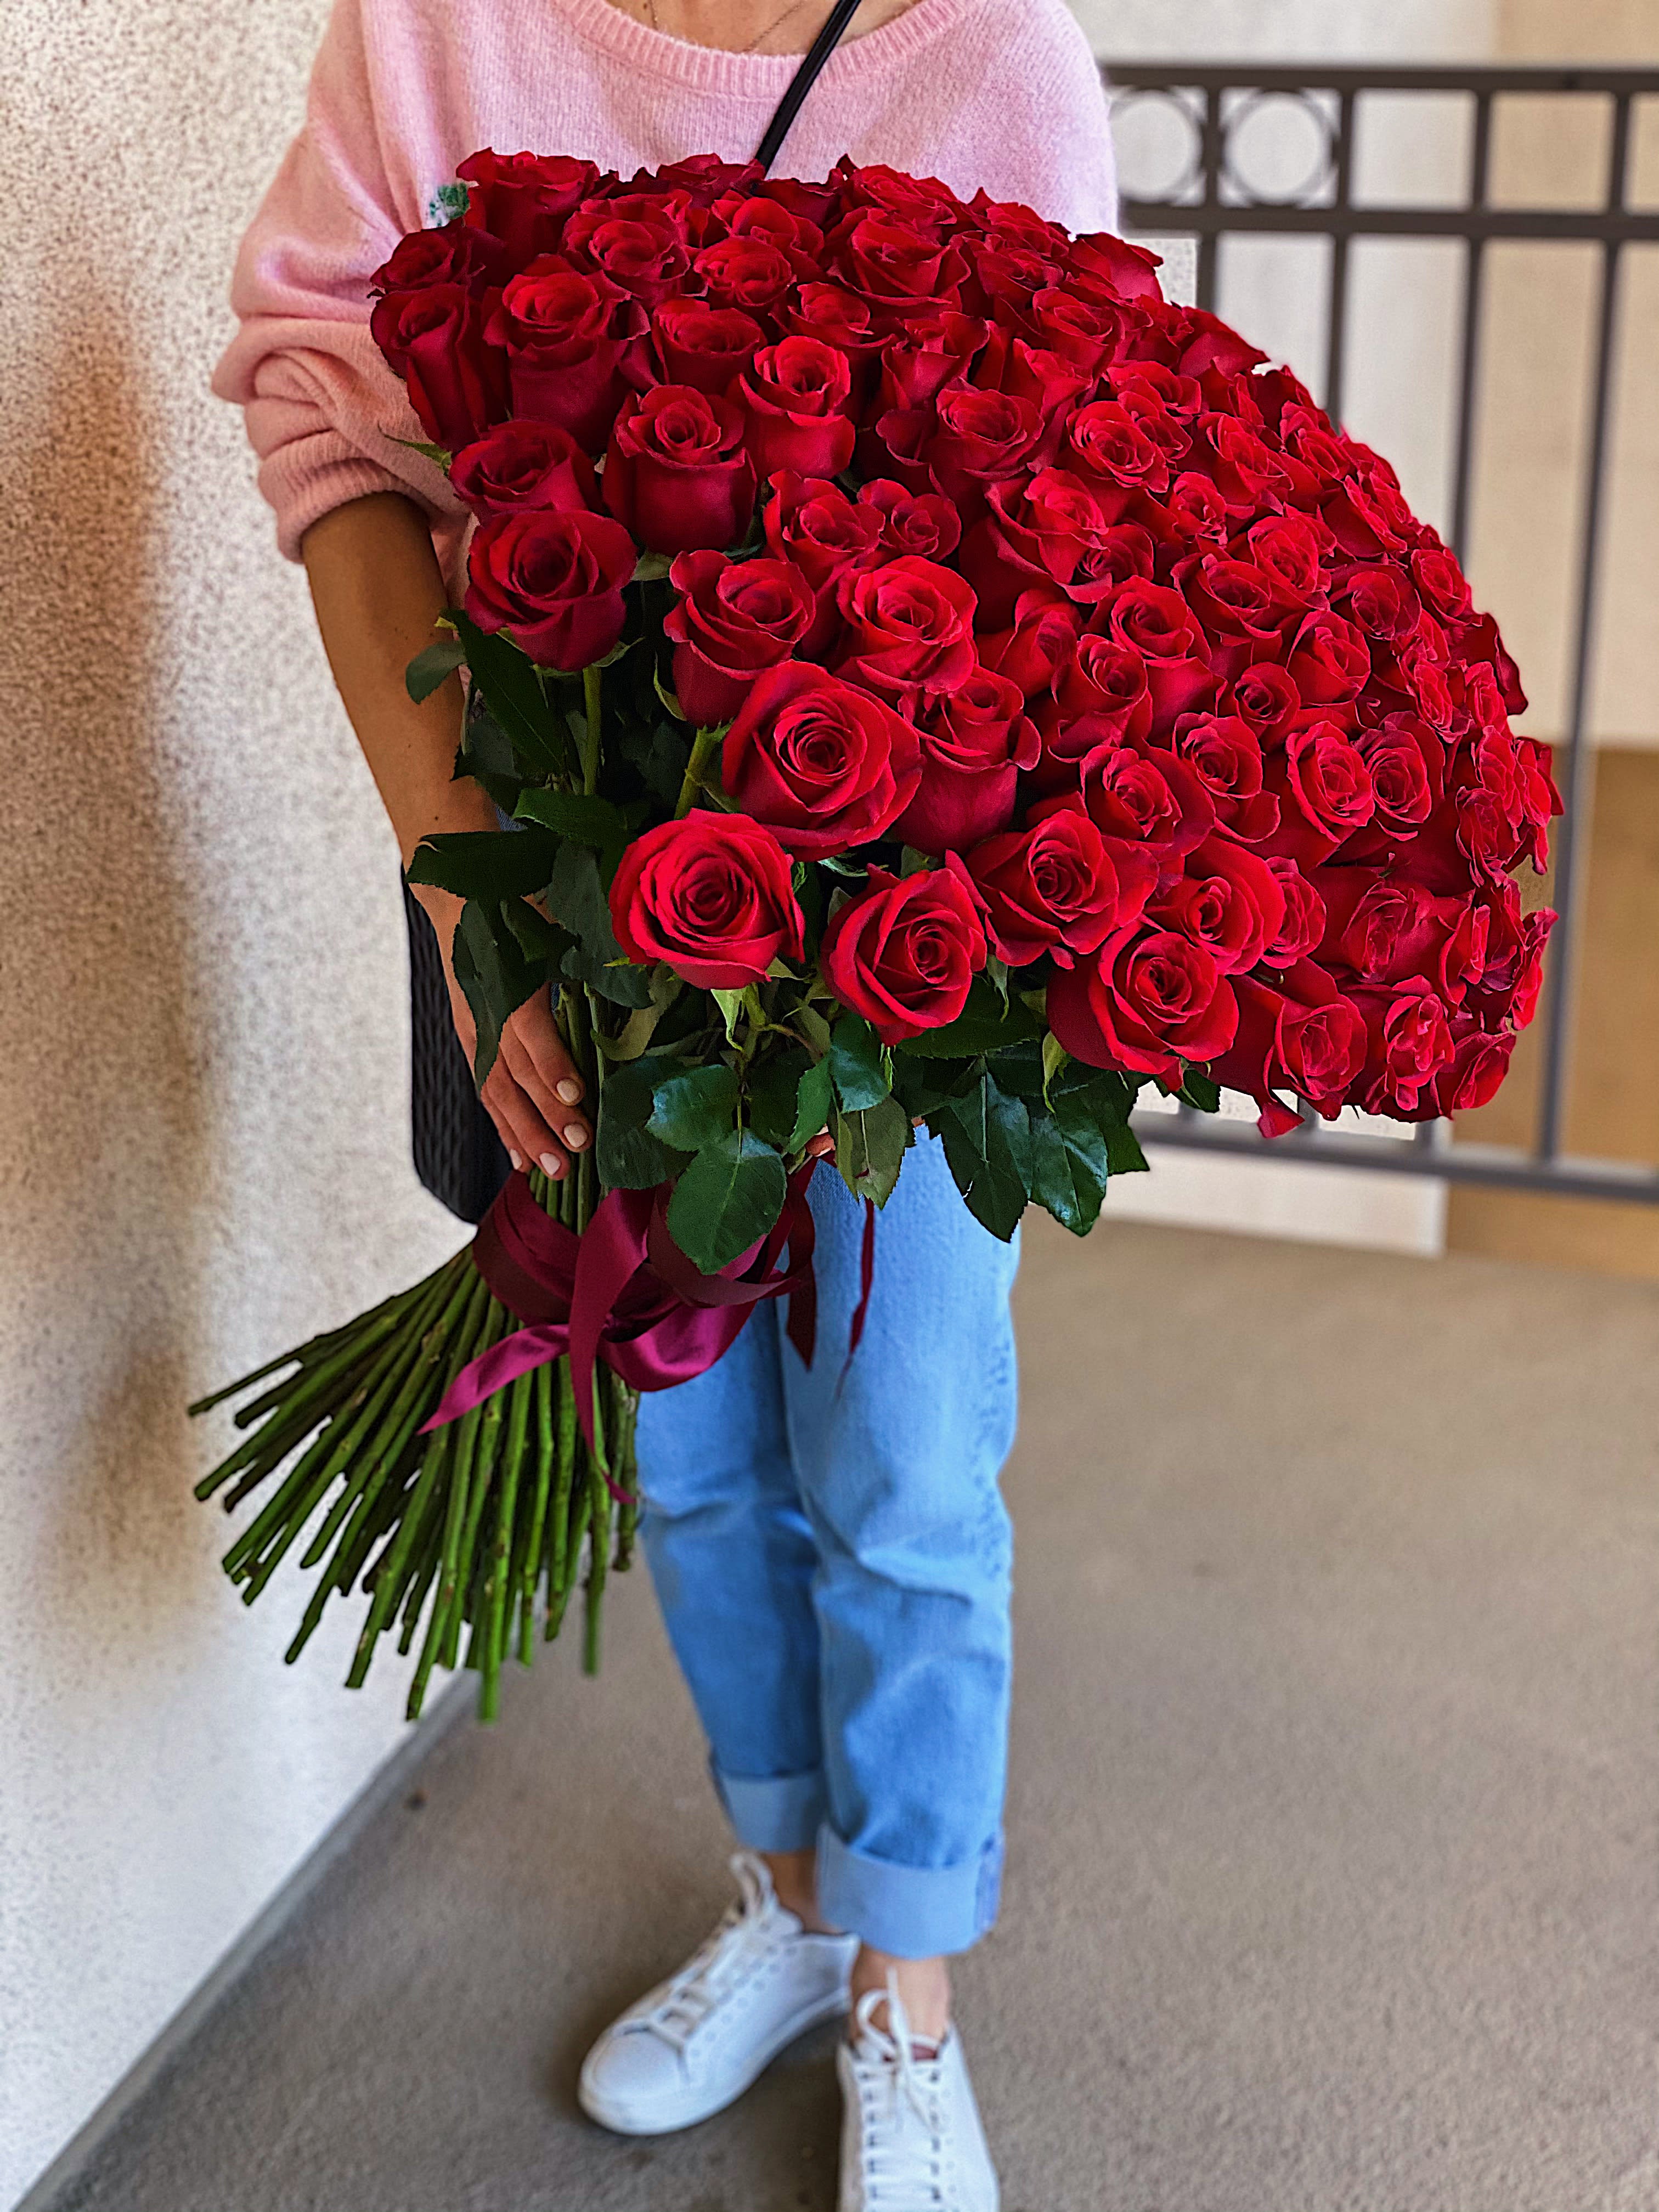 Bouquet 100 red roses in Irvine, CA | Flowers Delivery Irvine